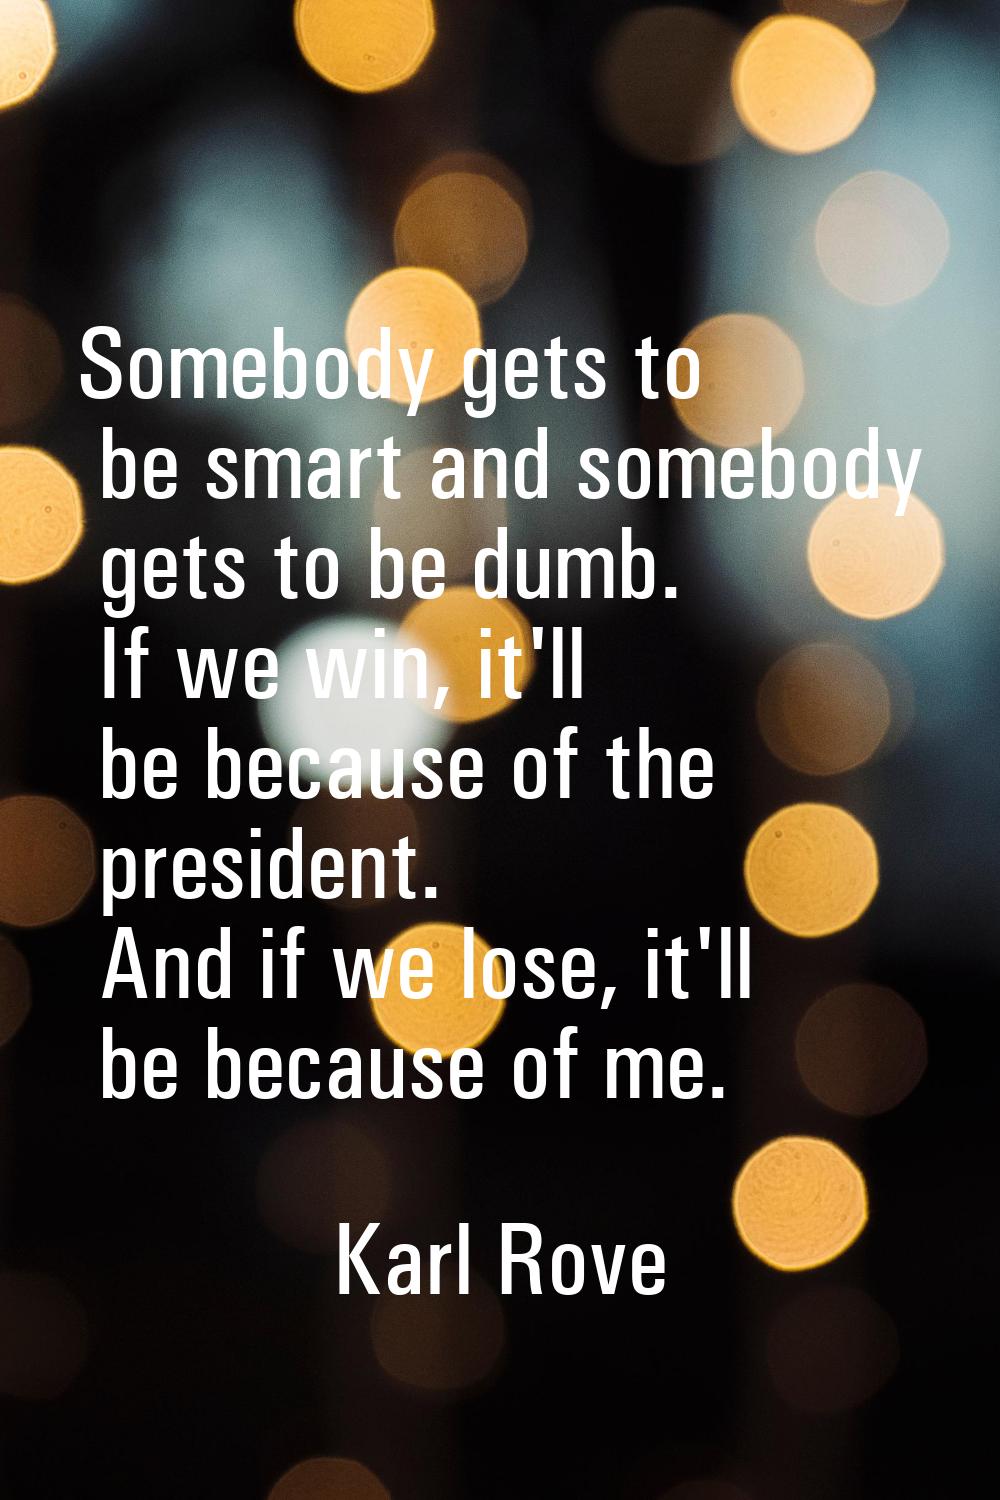 Somebody gets to be smart and somebody gets to be dumb. If we win, it'll be because of the presiden